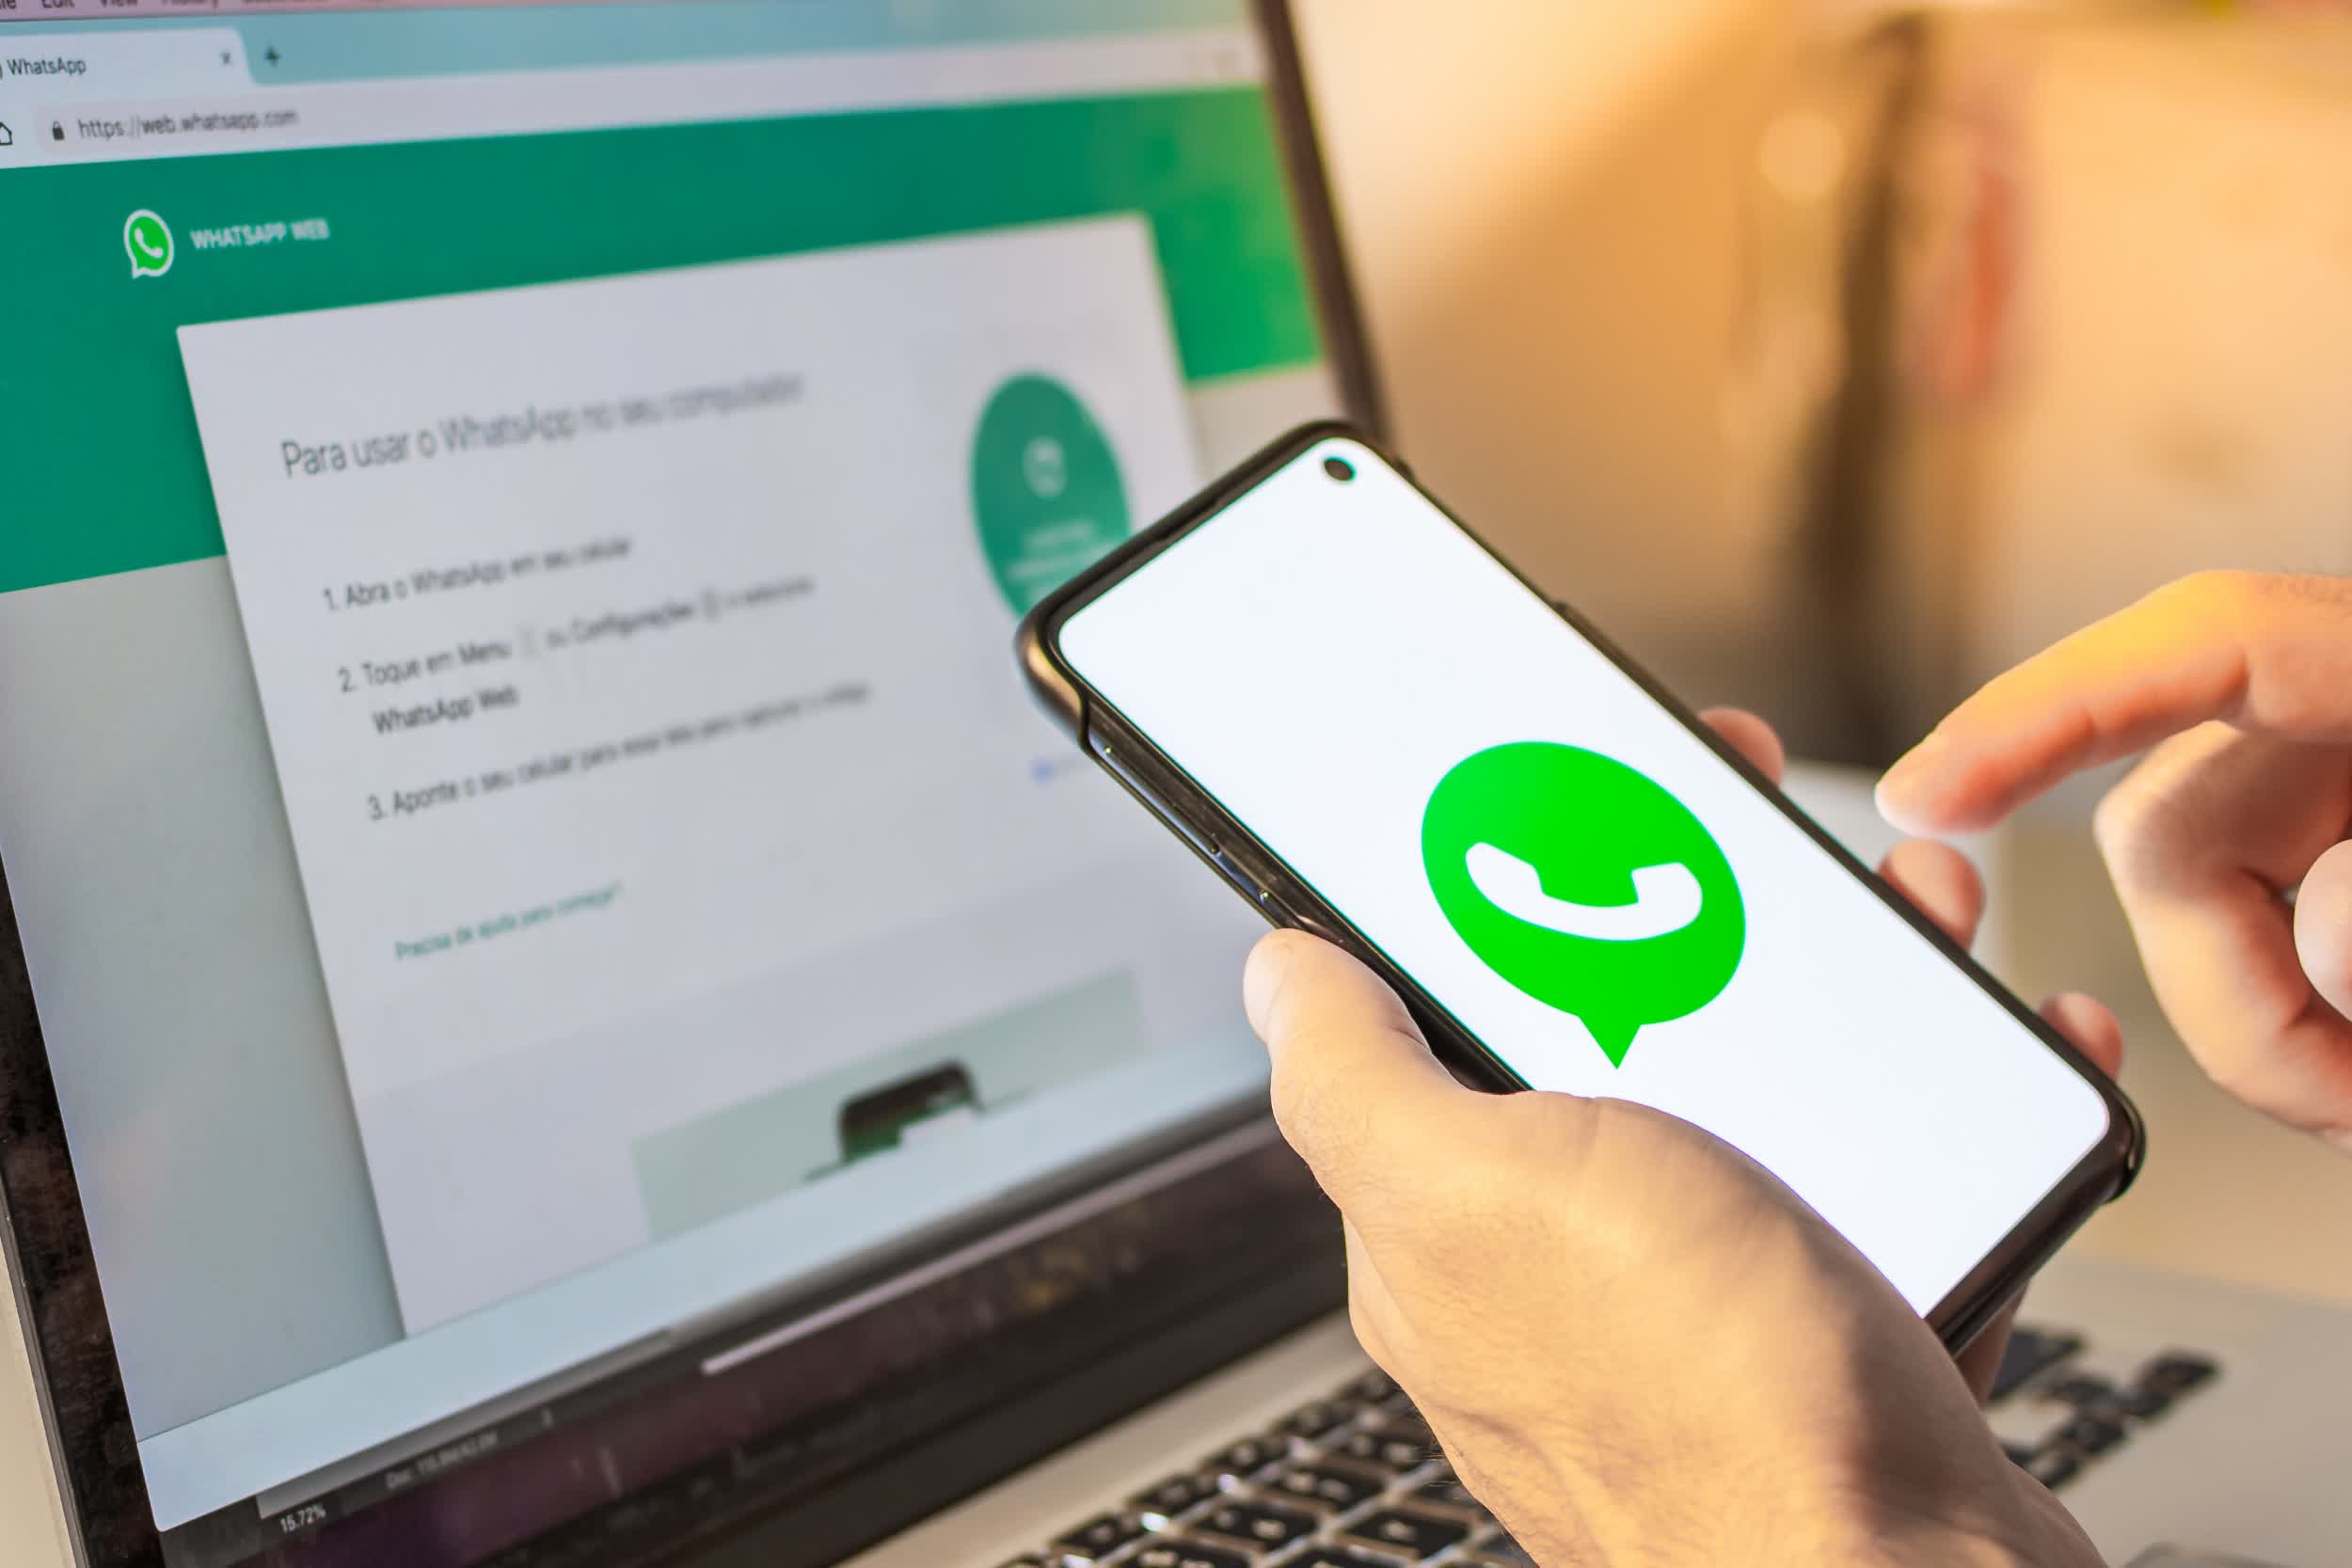 WhatsApp and Signal would leave the UK rather than comply with potential requirement for weakened encryption